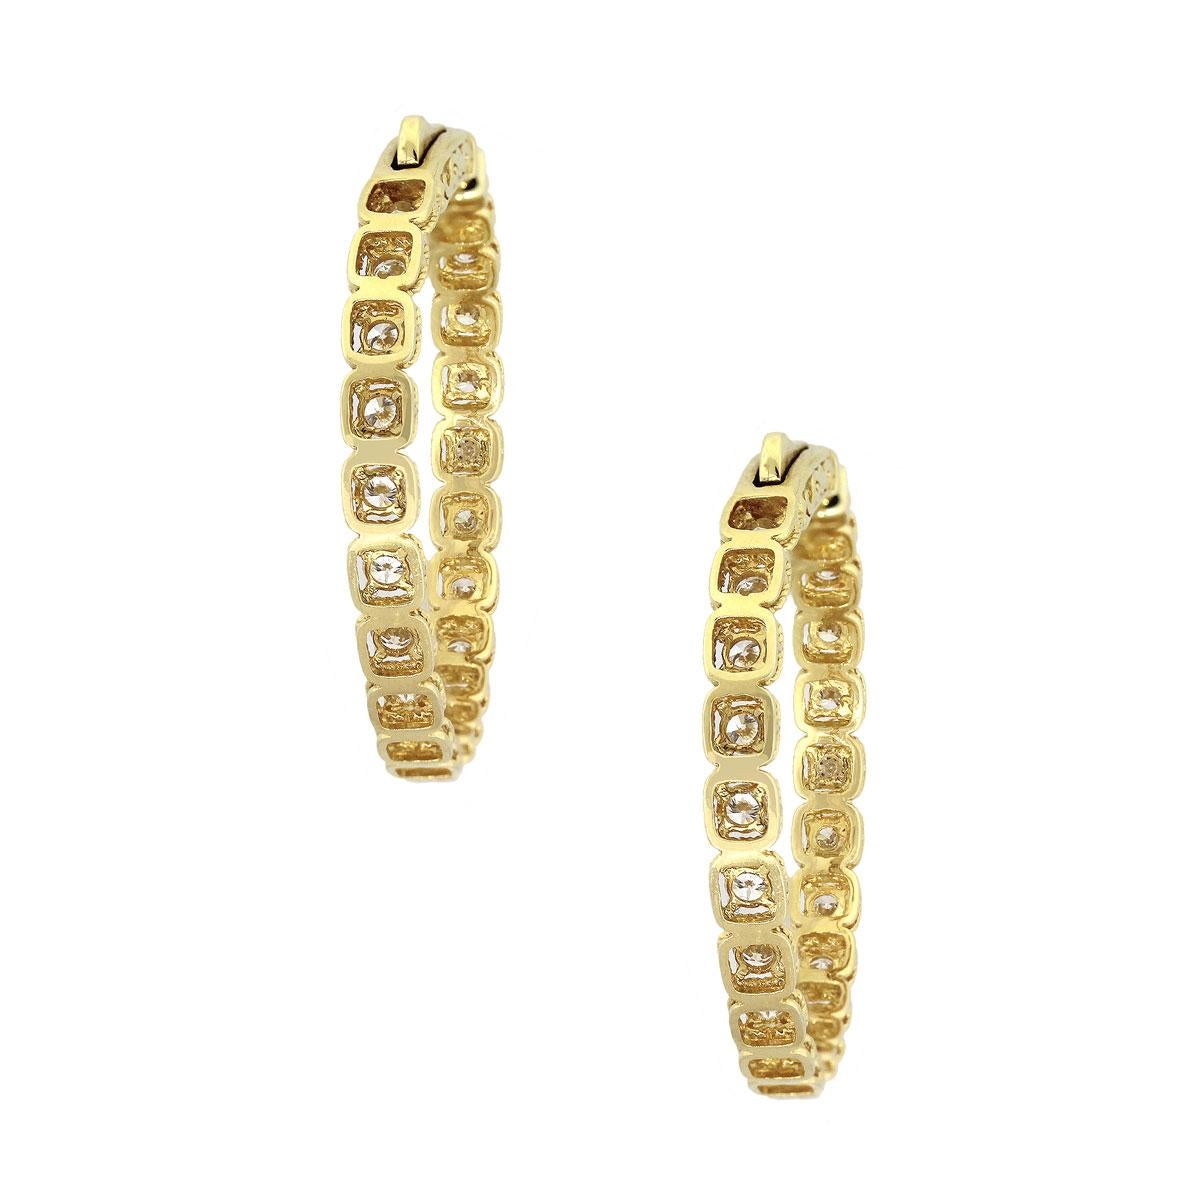 Material: 14k Yellow Gold
Diamond Details: Approximately 3.38ctw of round brilliant diamonds. Diamonds are G/H in color and SI in clarity.
Measurements: 1.50″ x 0.16″ x 1.48″
Earring Backs: Hinged
Total Weight: 11.5g (7.4dwt)
SKU: A30312433